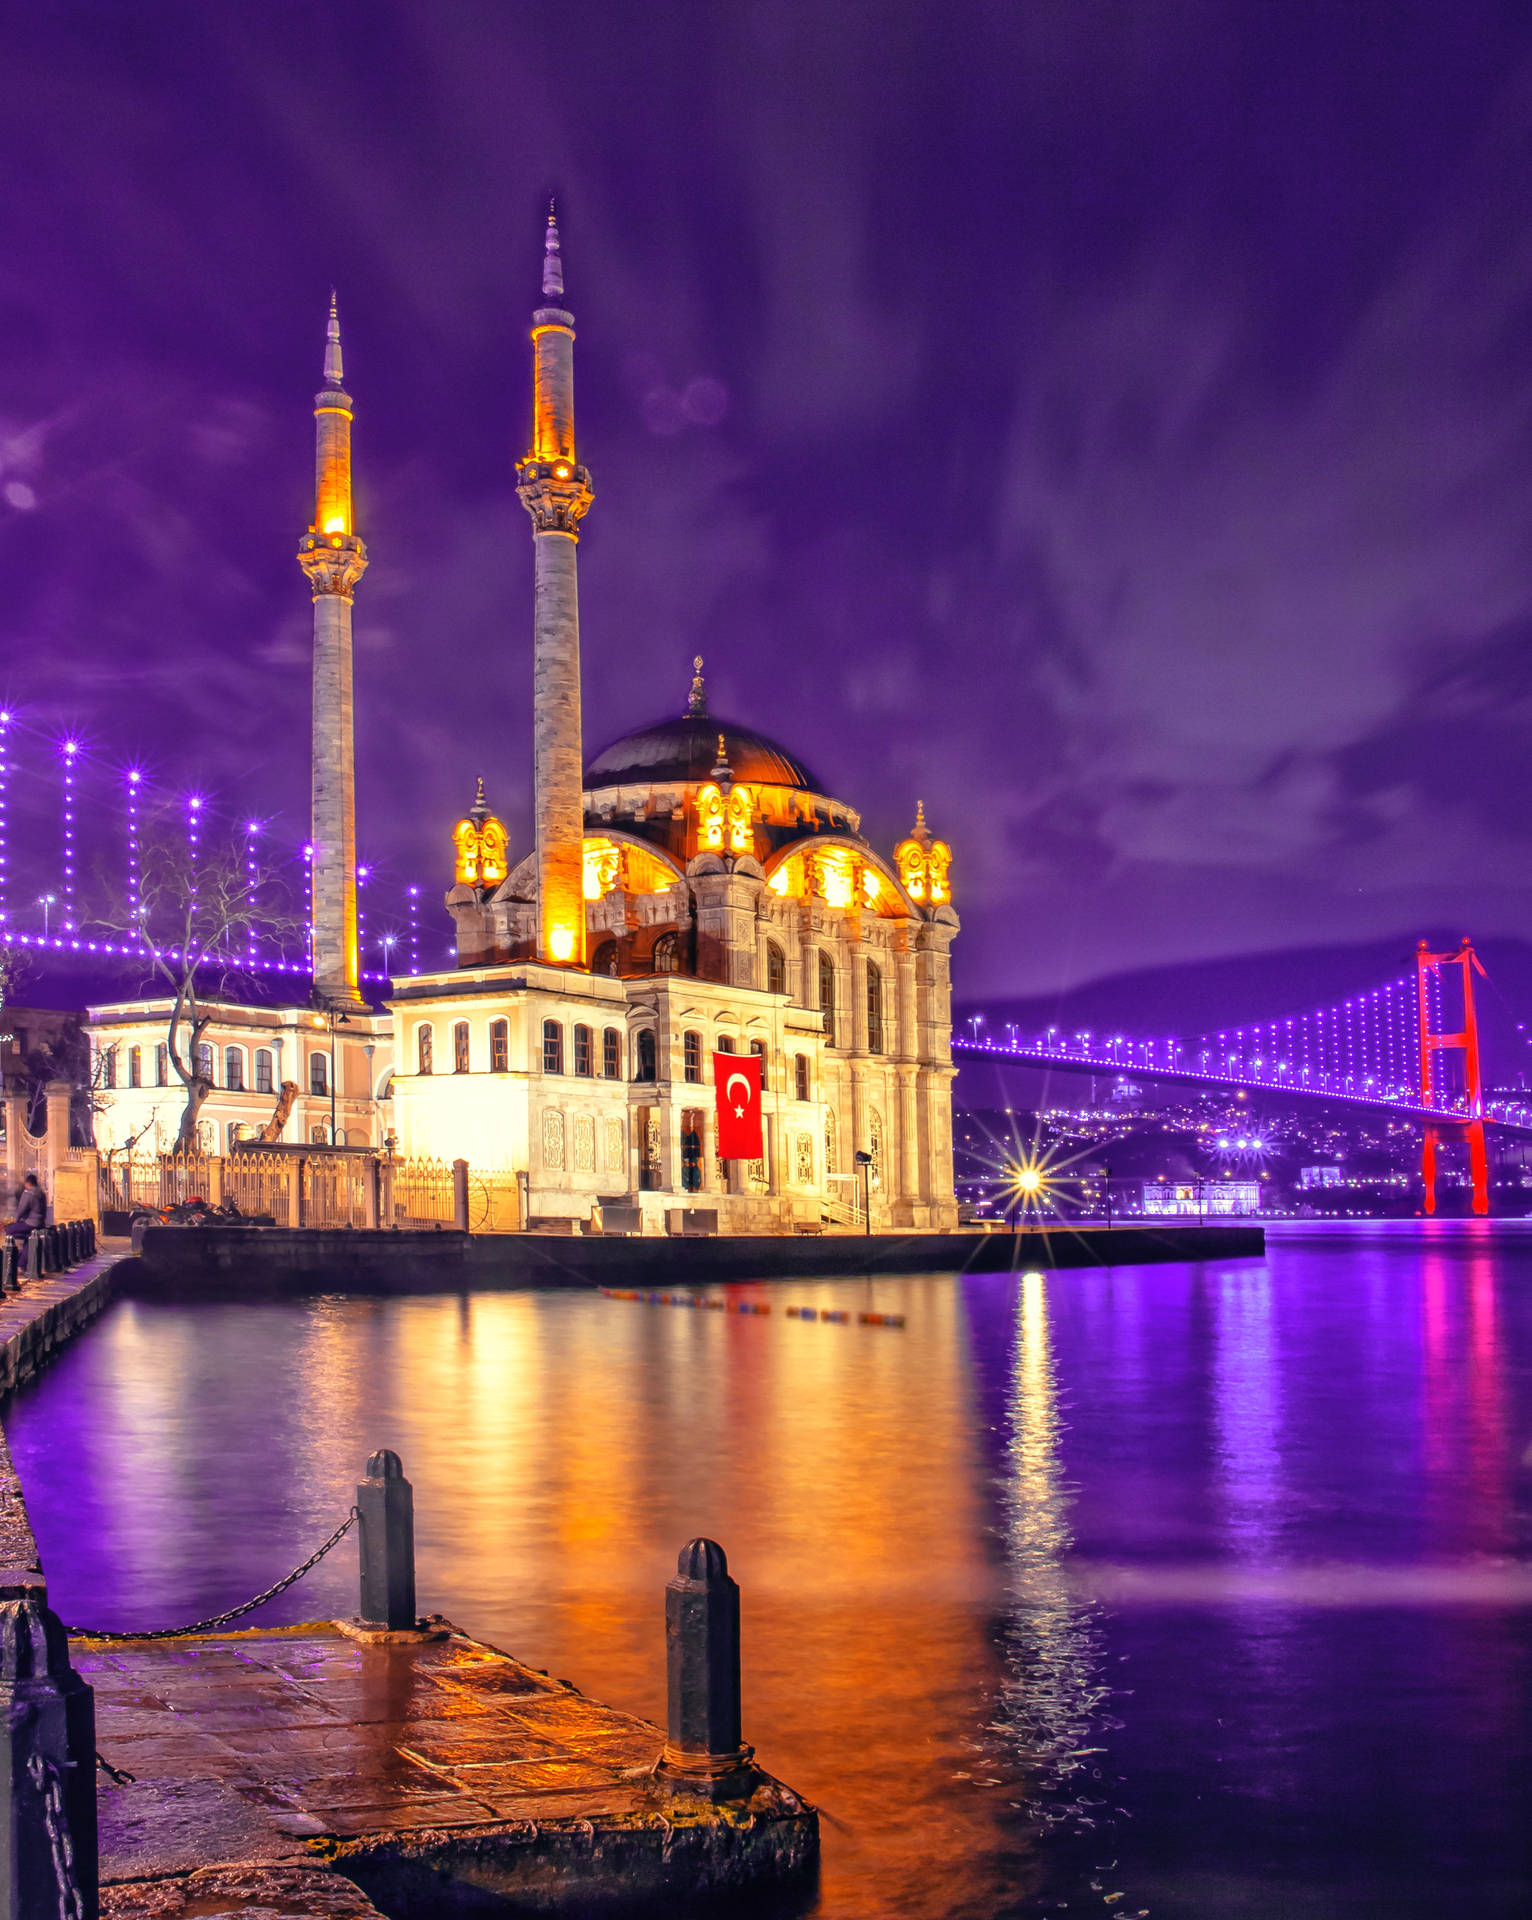 Stunning Istanbul Mosque During a Nighttime Wallpaper